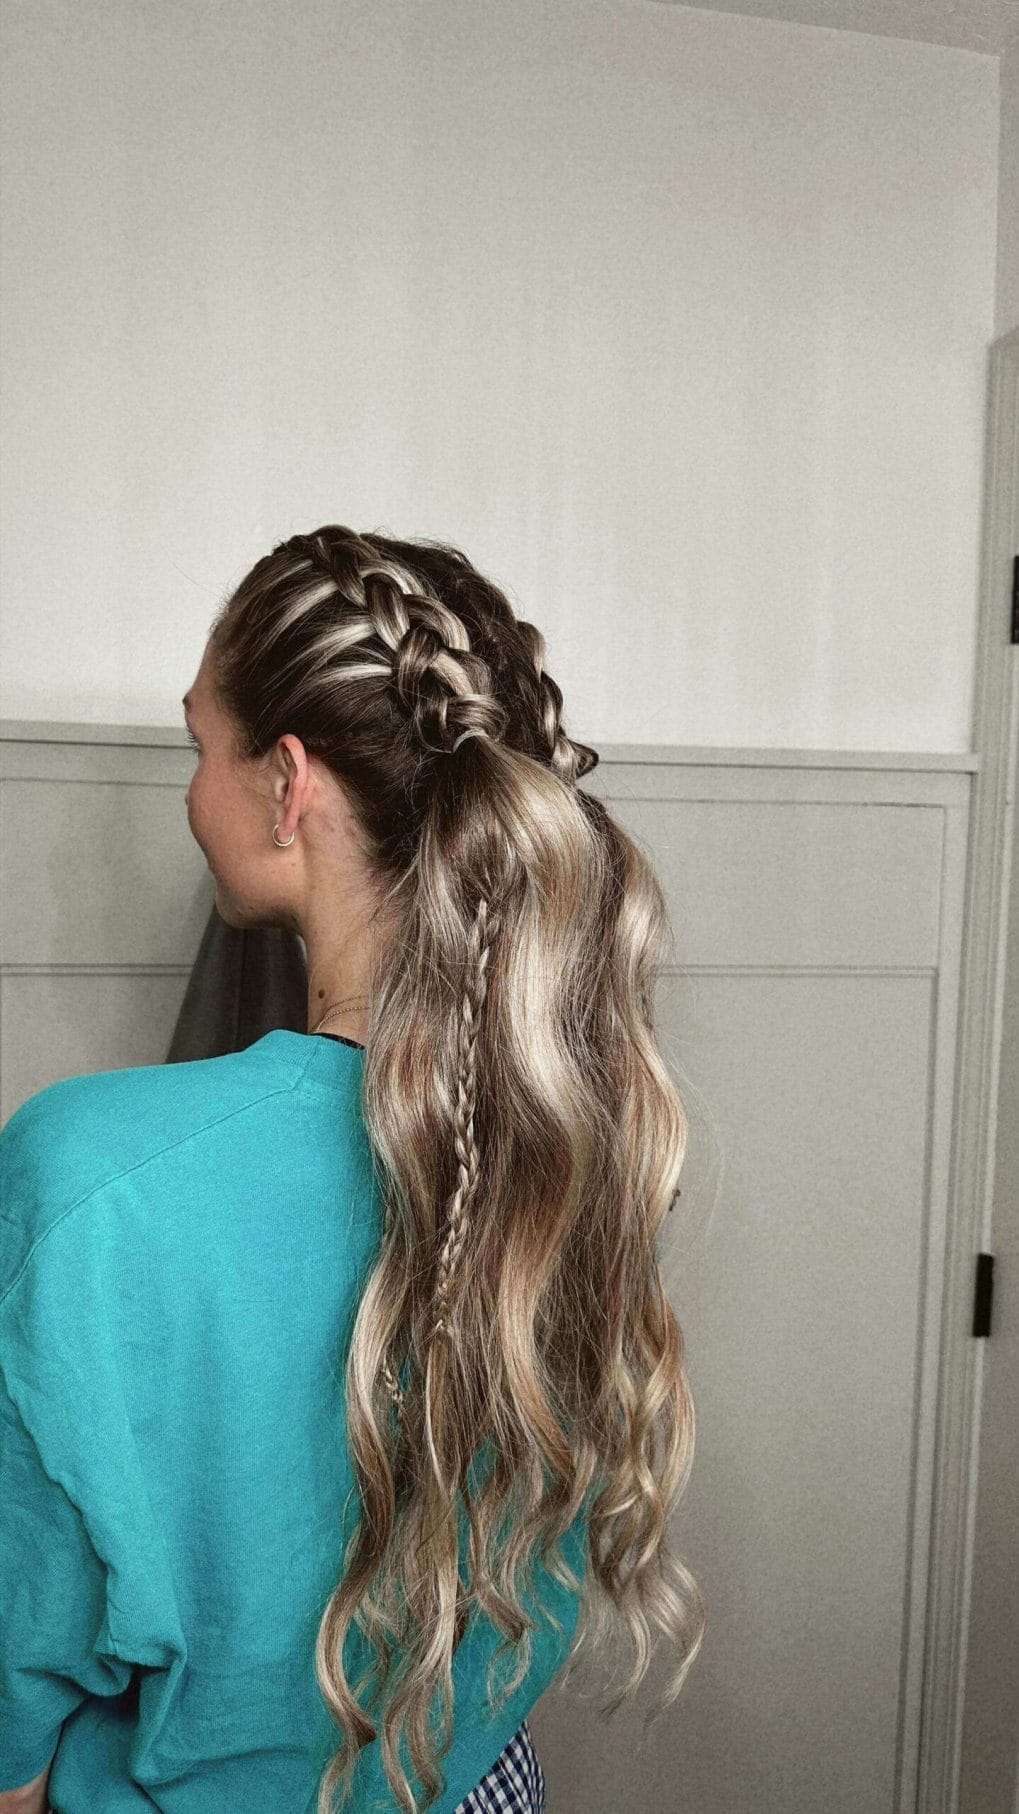 Blonde hair with braid starting from the front into relaxed waves for volleyball ease